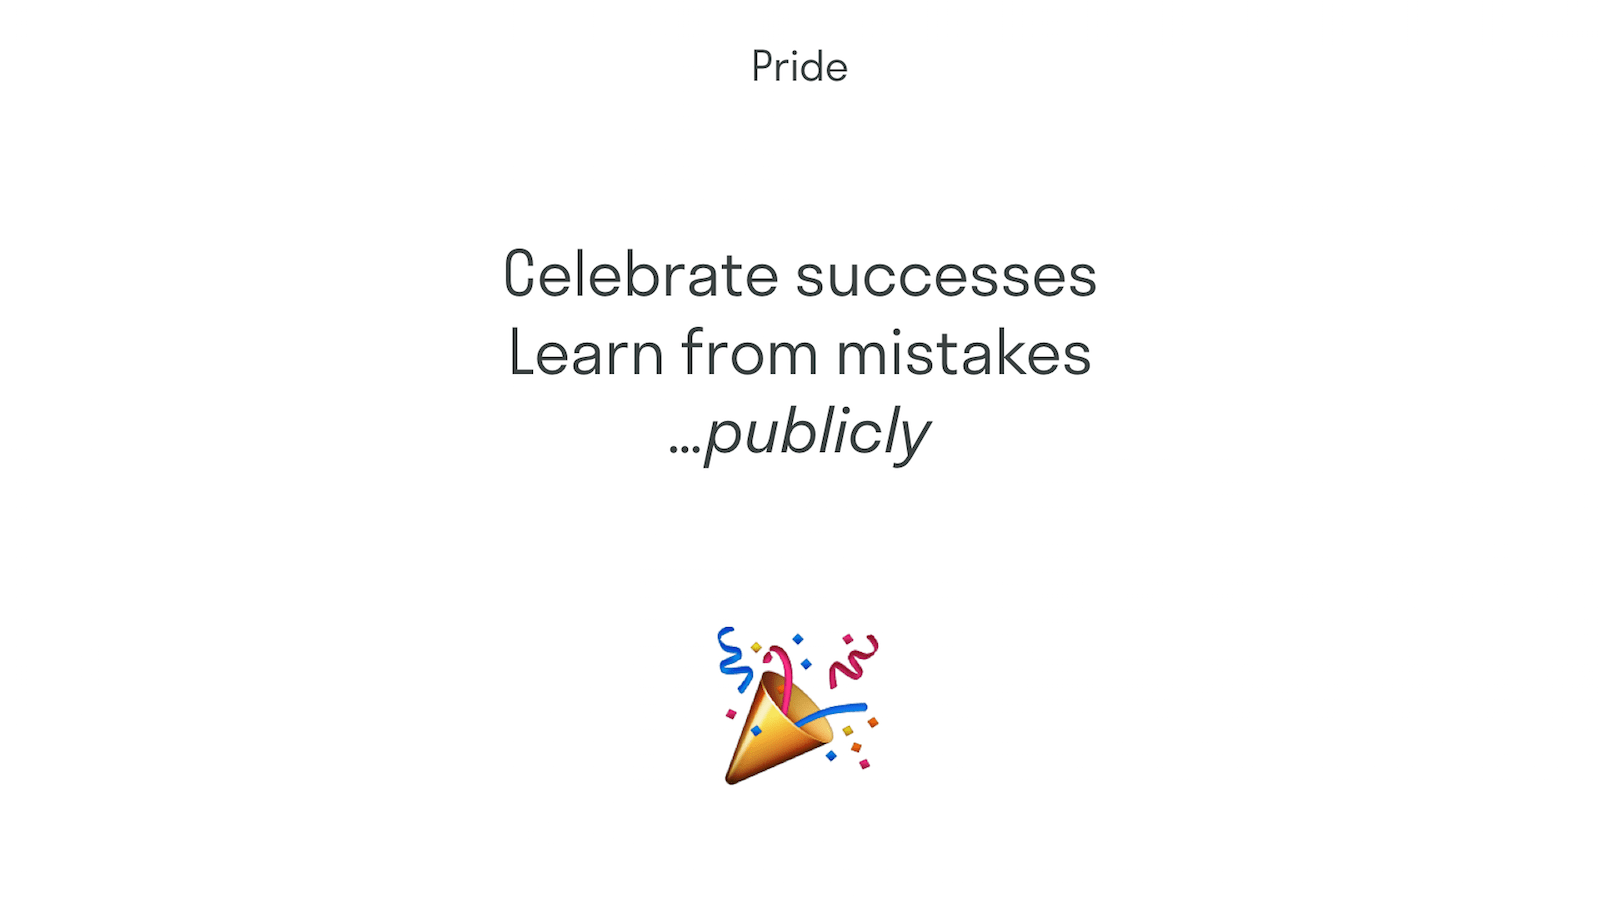 Celebrate success and learn from mistakes… publicly.